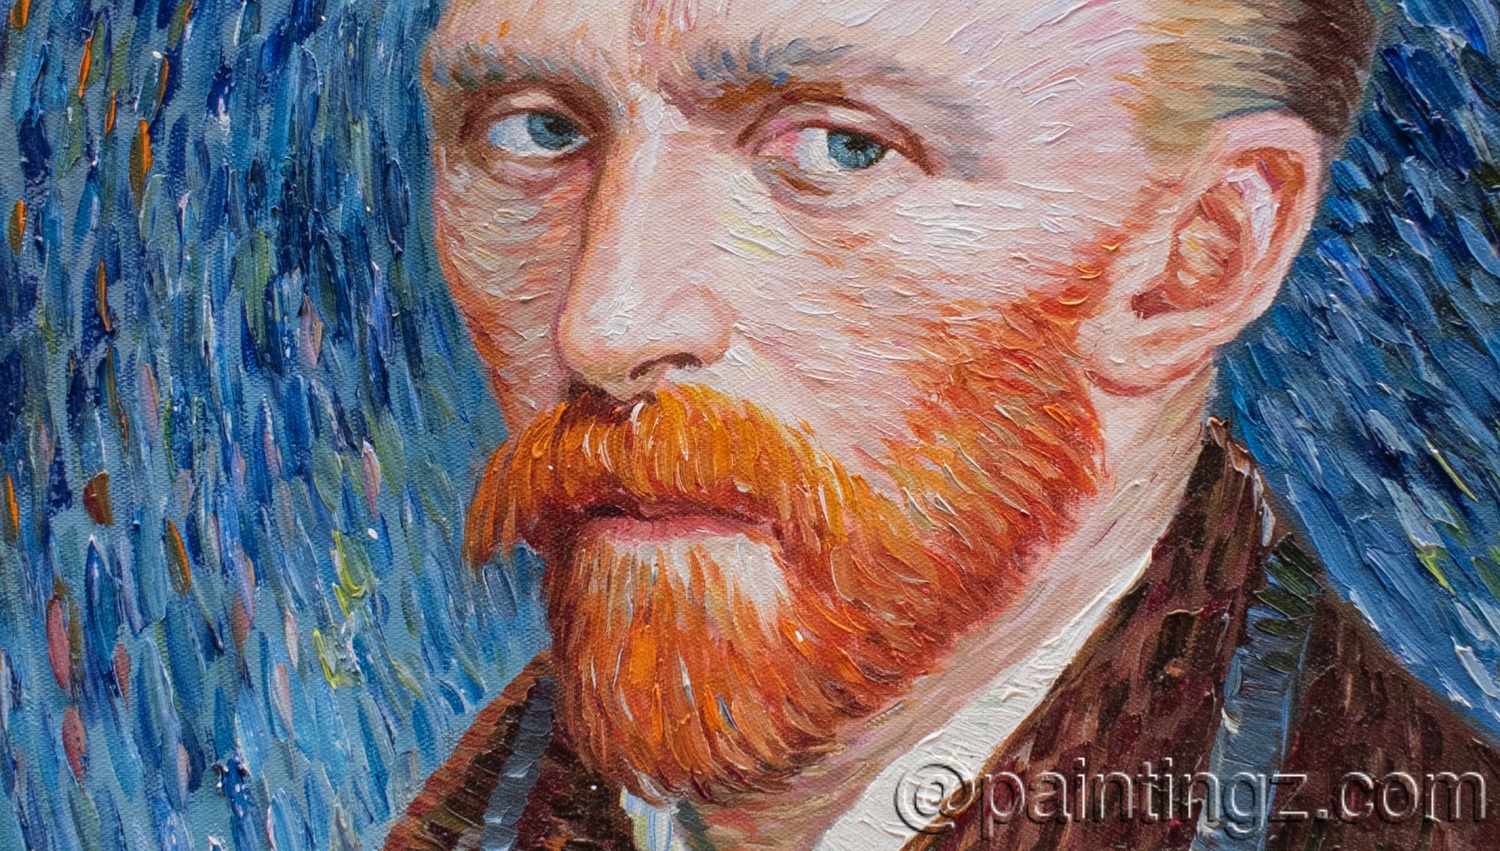 Brushstrokes in A Reproduction of Van Gogh's Self-Portrait